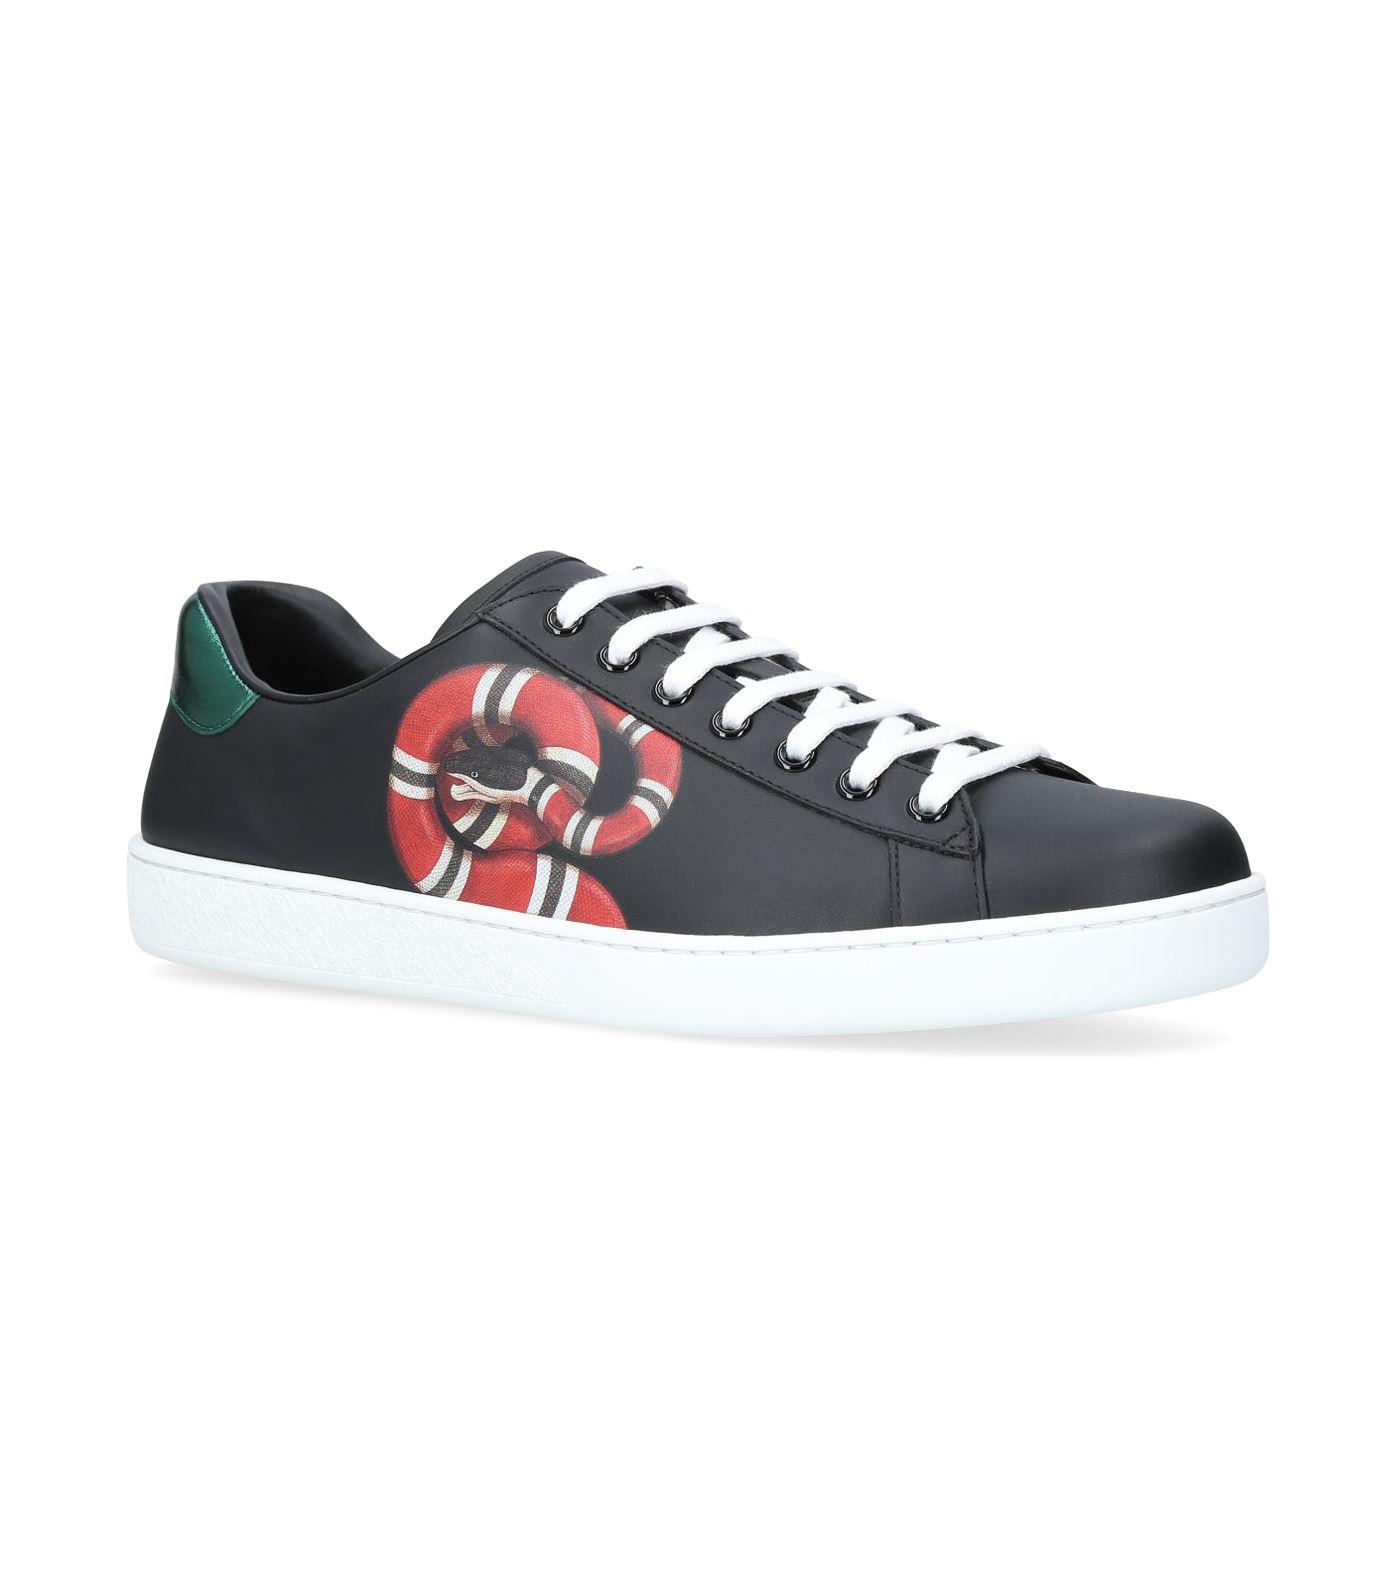 Gucci Snake Print Ace Sneakers in Black - Lyst